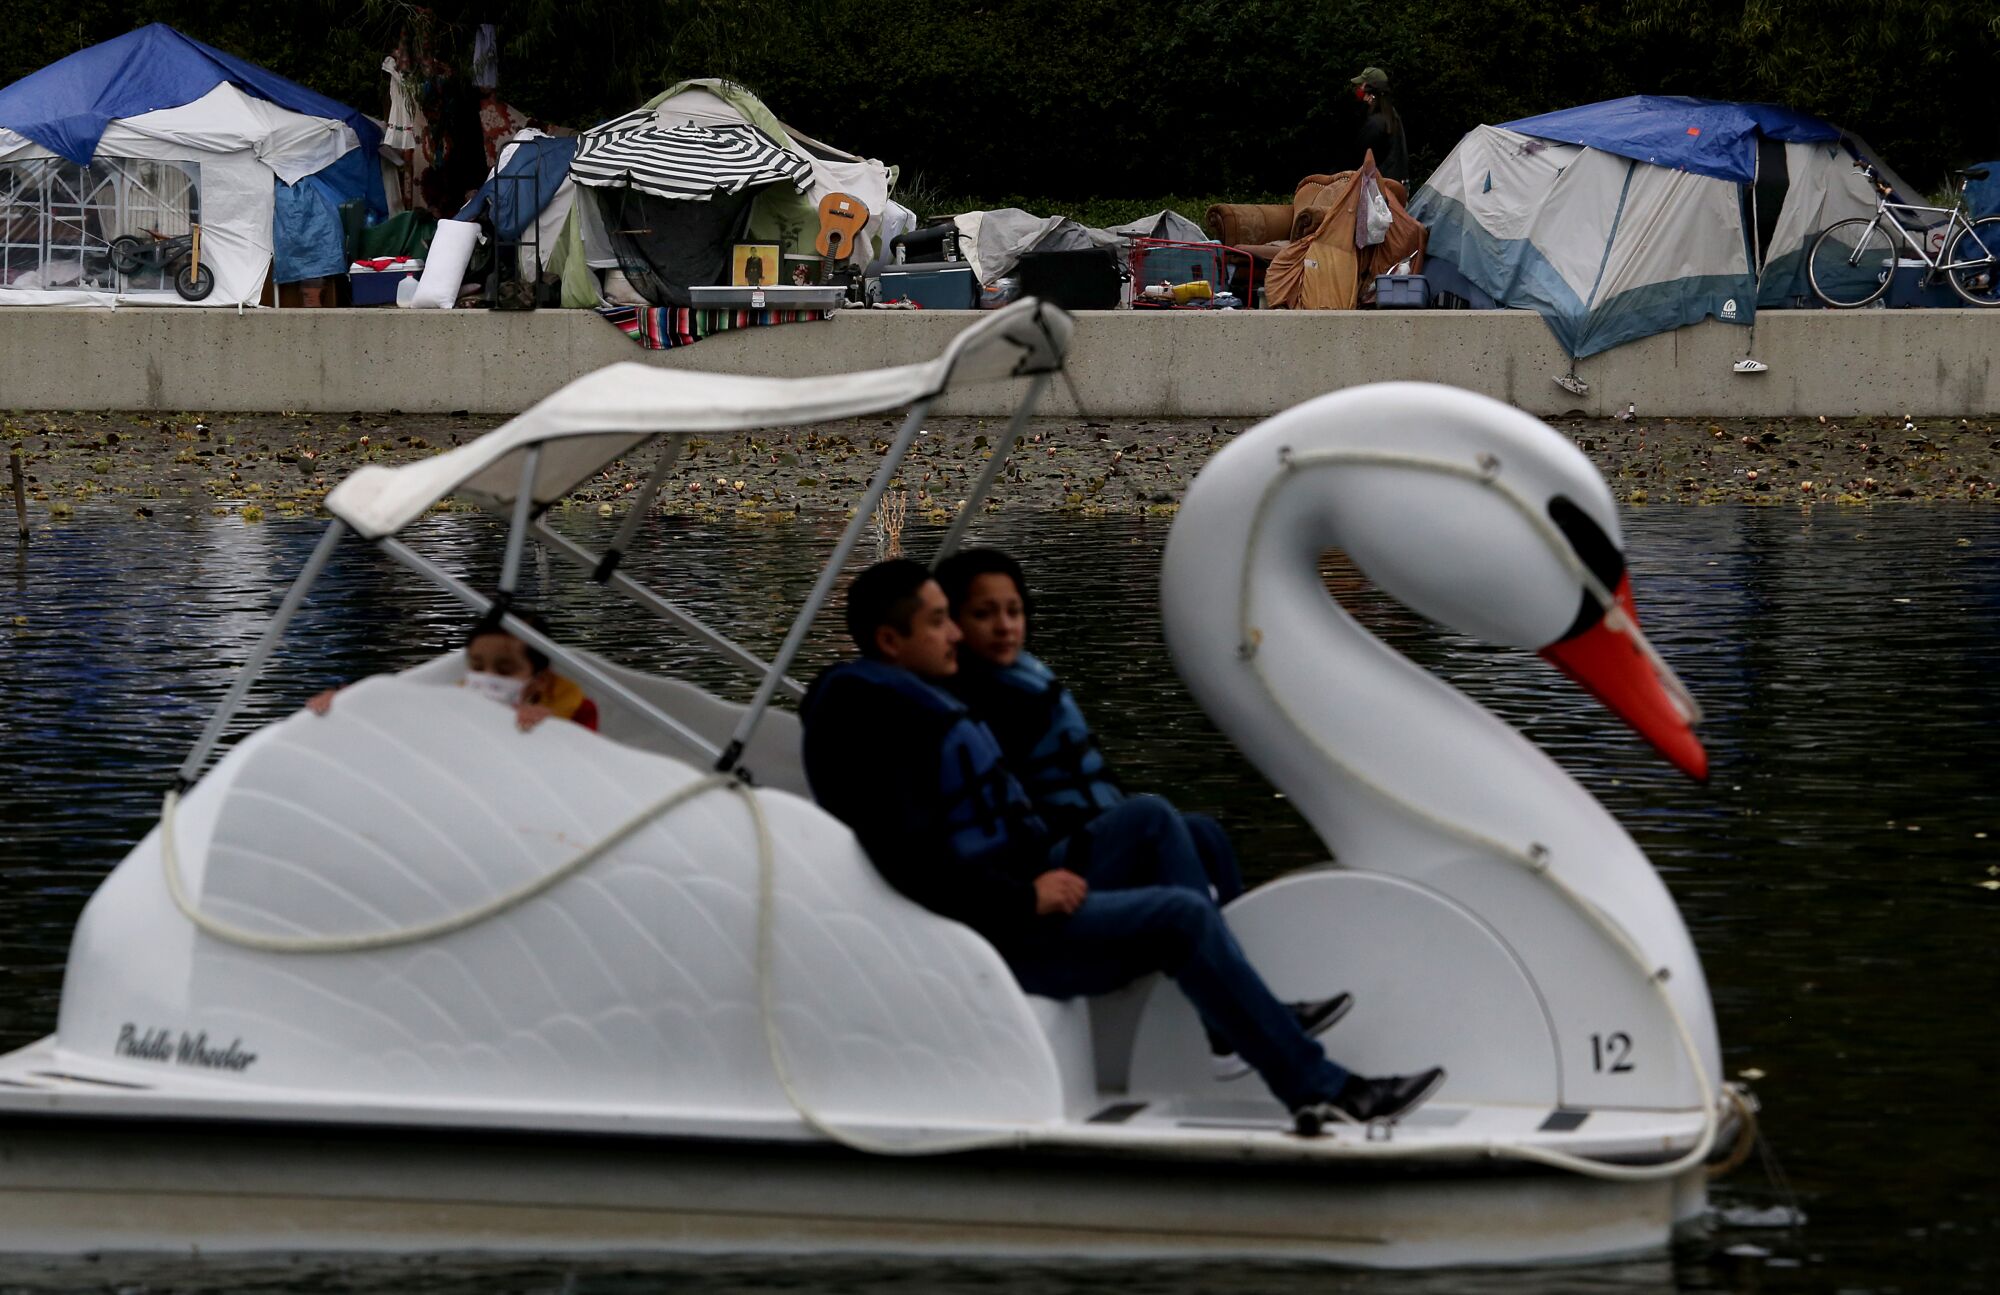 A couple use a swan boat at Echo Park Lake with a homeless encampment in the background.